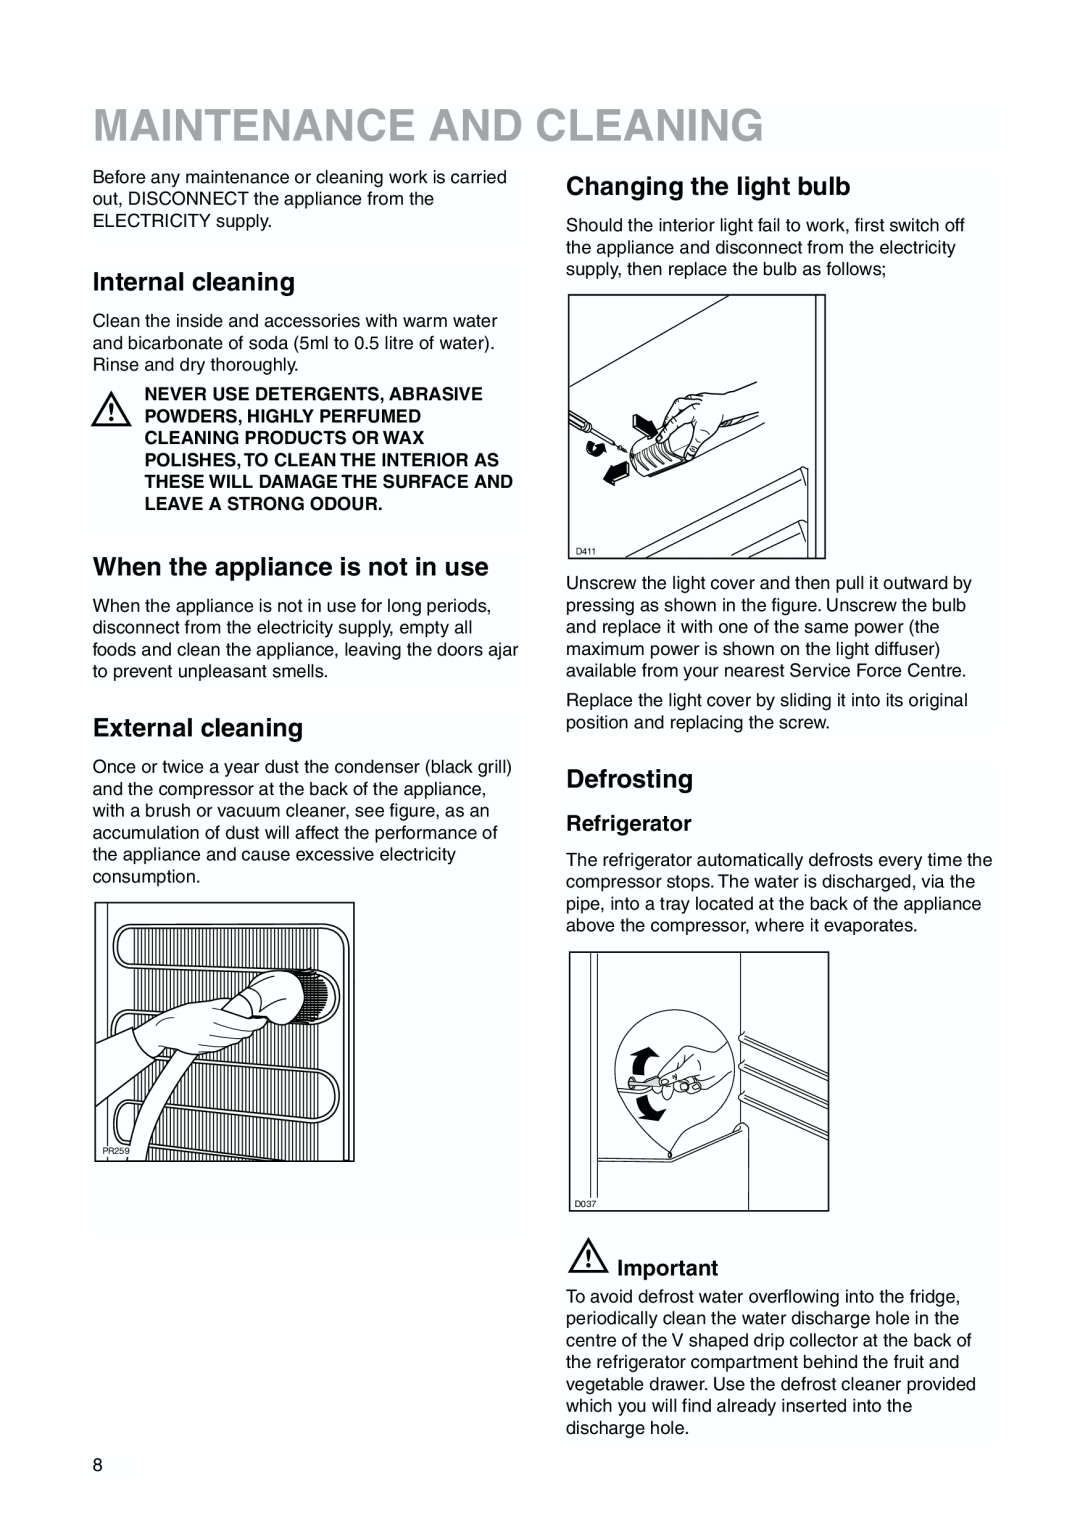 Zanussi ZBB 7294 manual Maintenance And Cleaning, Internal cleaning, When the appliance is not in use, External cleaning 